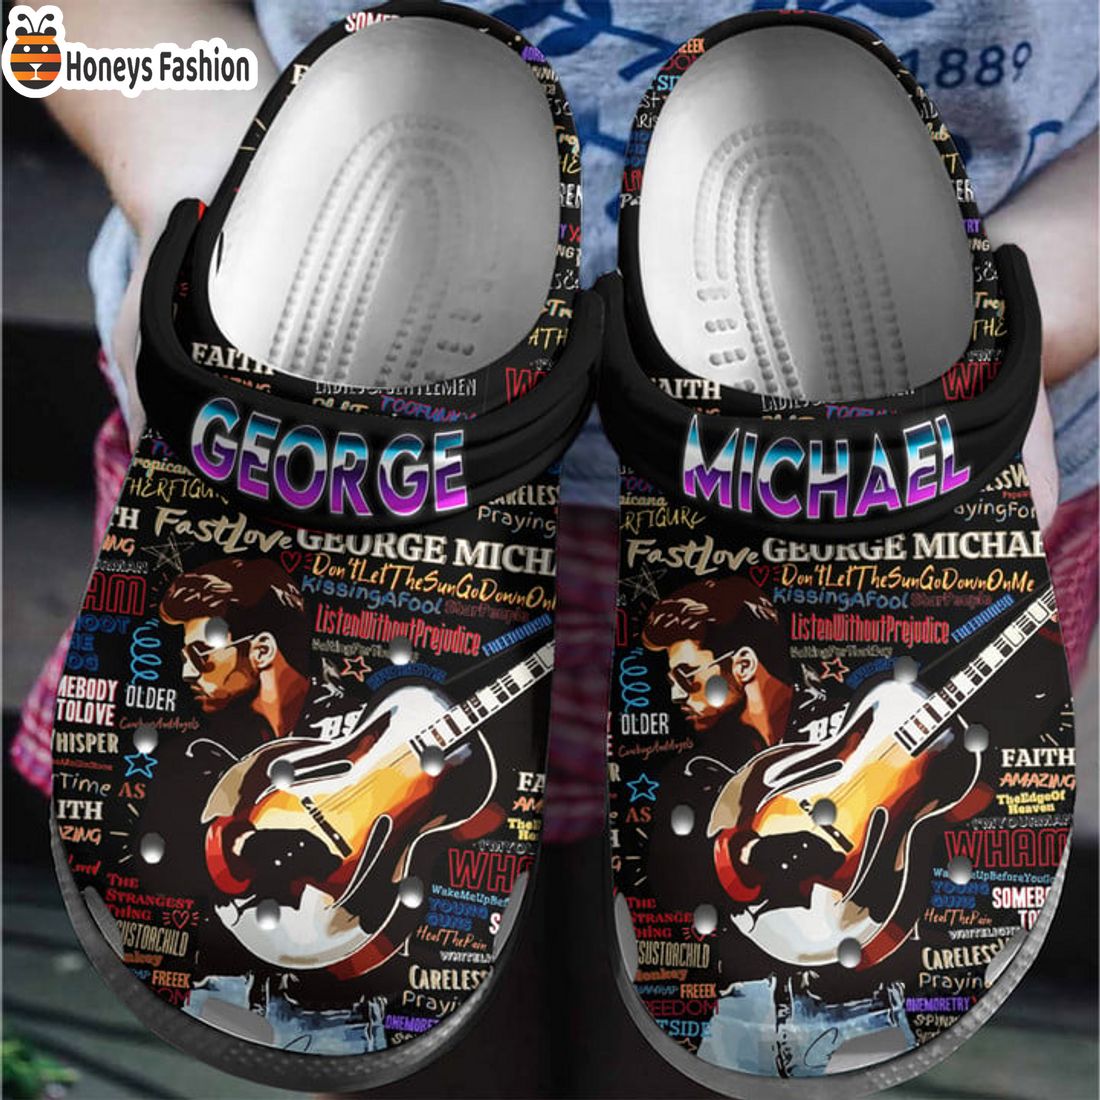 SELLER George Michael Don’t Let The Sn Go Down On Me Fleece Crocs Clog Shoes